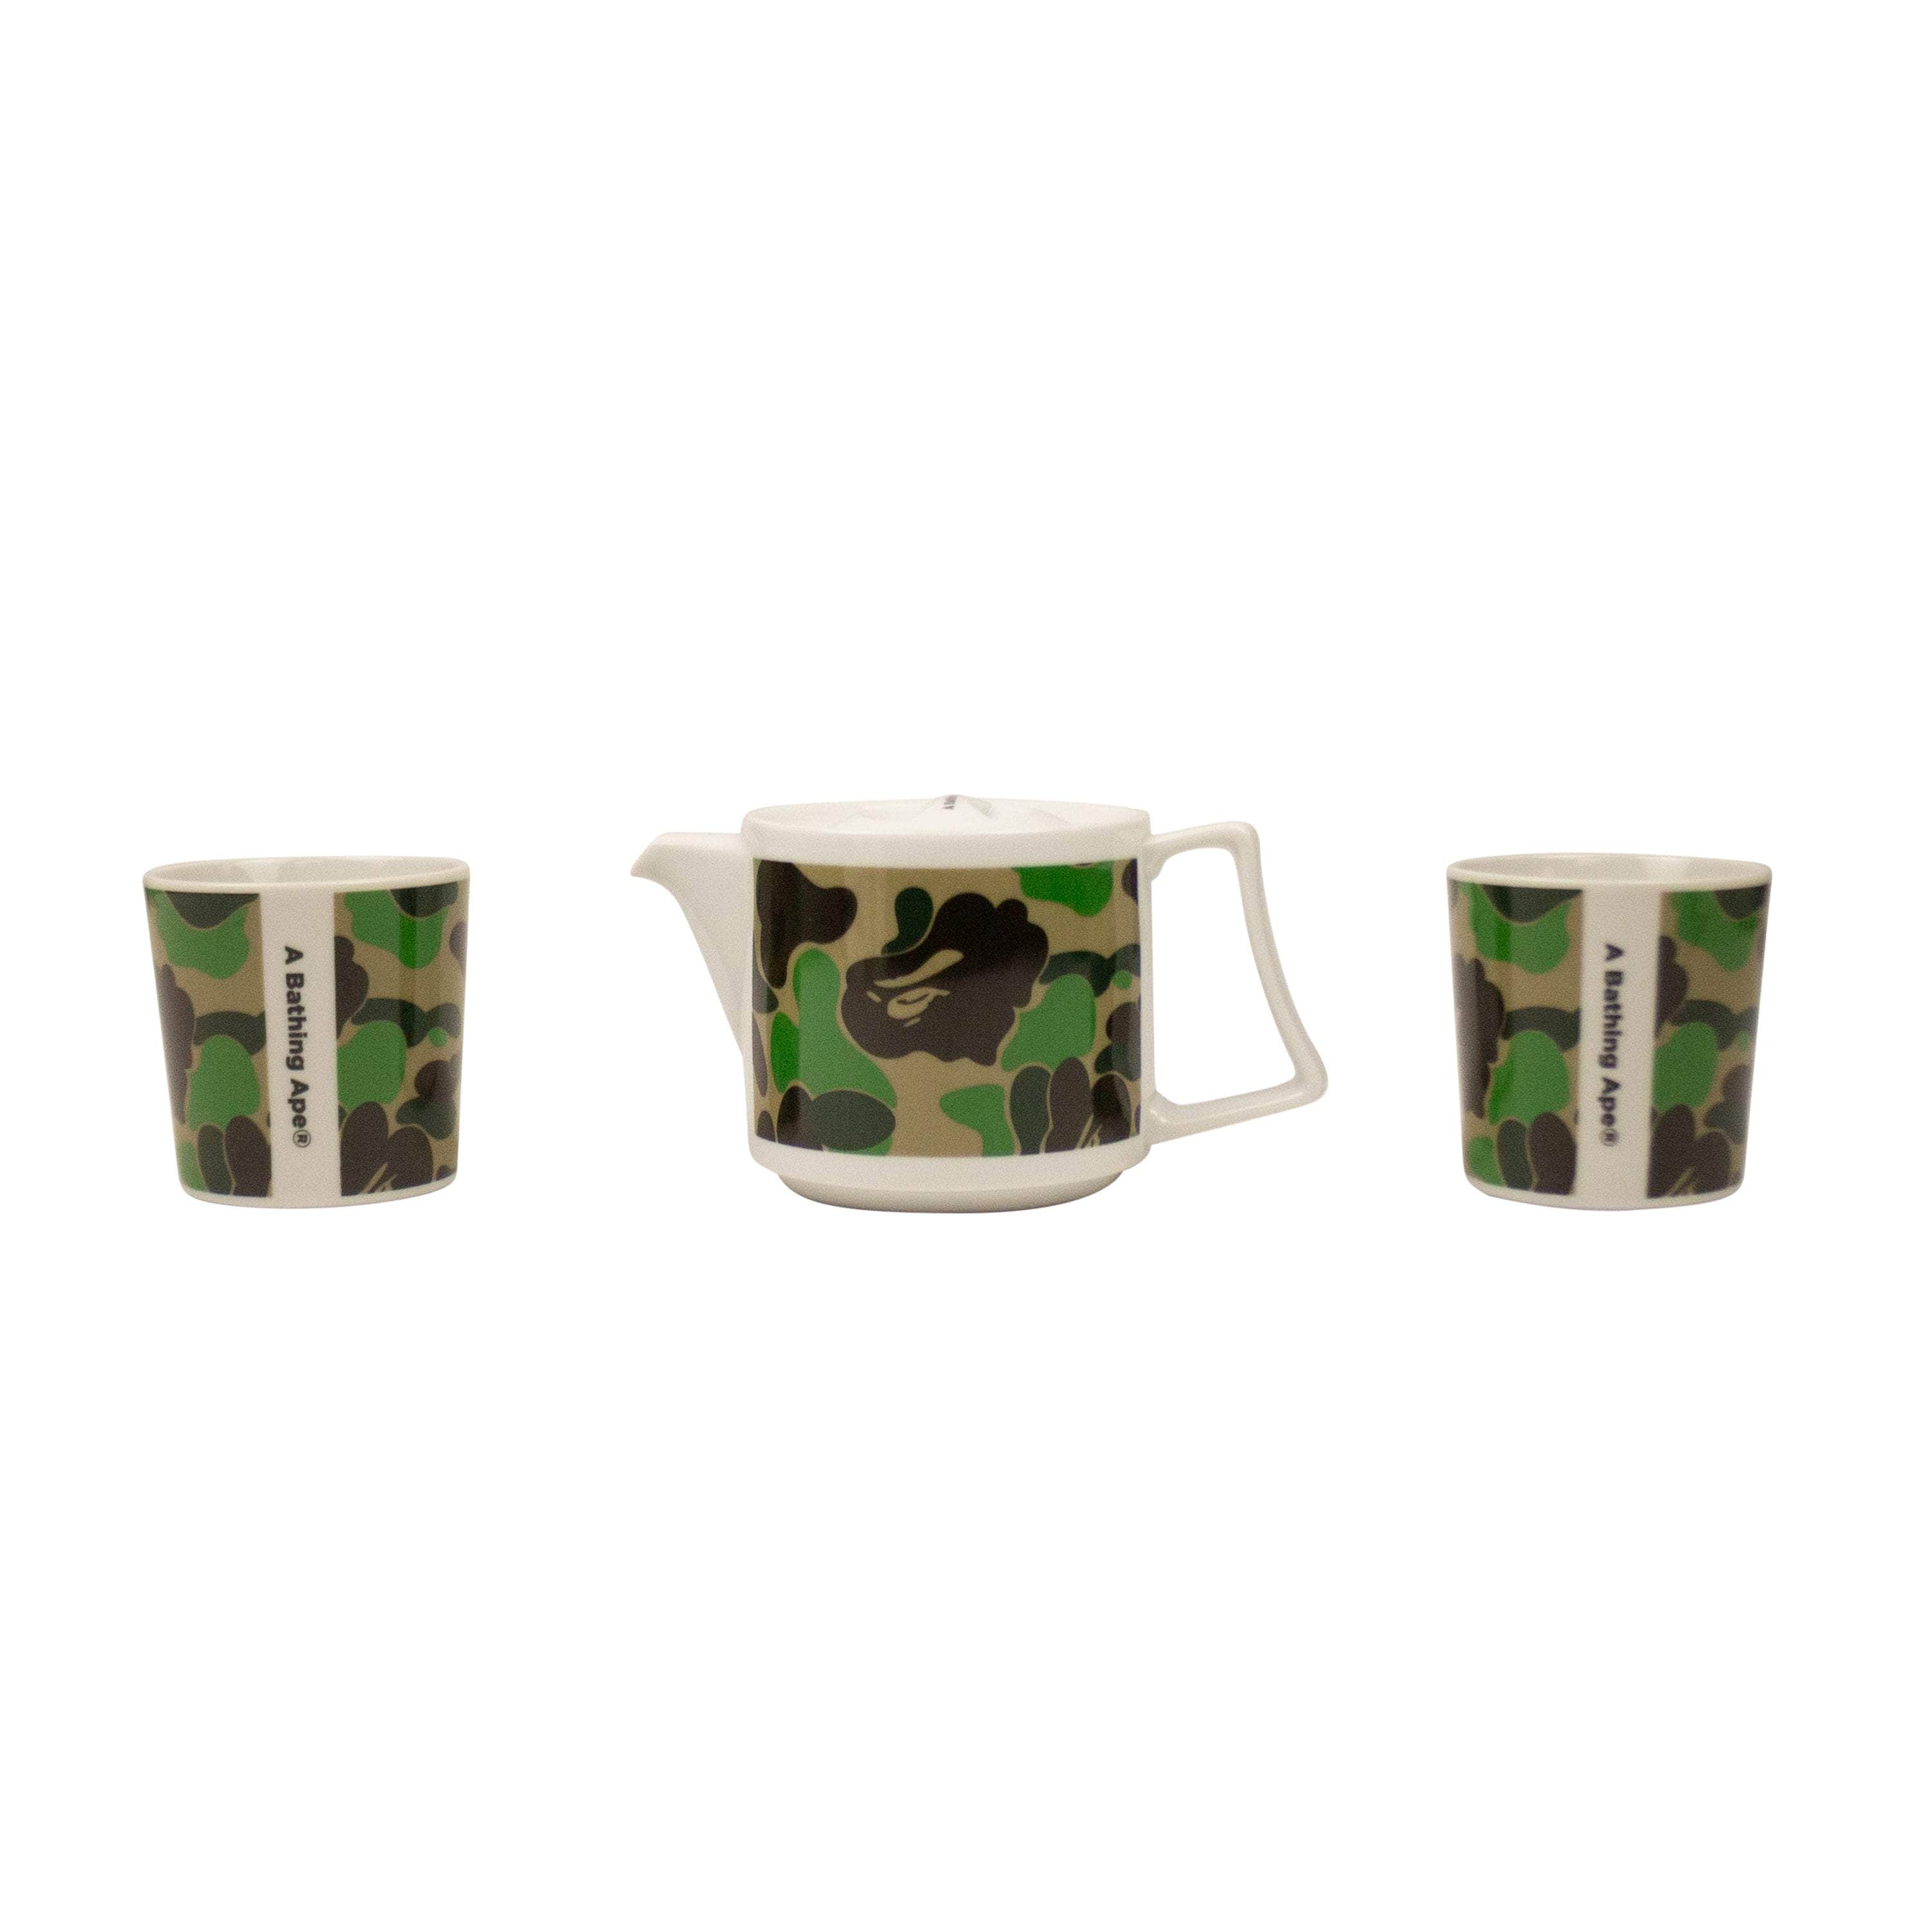 Bape 250-500, bape, channelenable-all, chicmi, couponcollection, gender-mens, gender-womens, kitchen-decor, main-accessories, mens-shoes, shop375, size-os OS Green ABC Camoflage Tea Pot Set BAP-XACC-0018/OS BAP-XACC-0018/OS